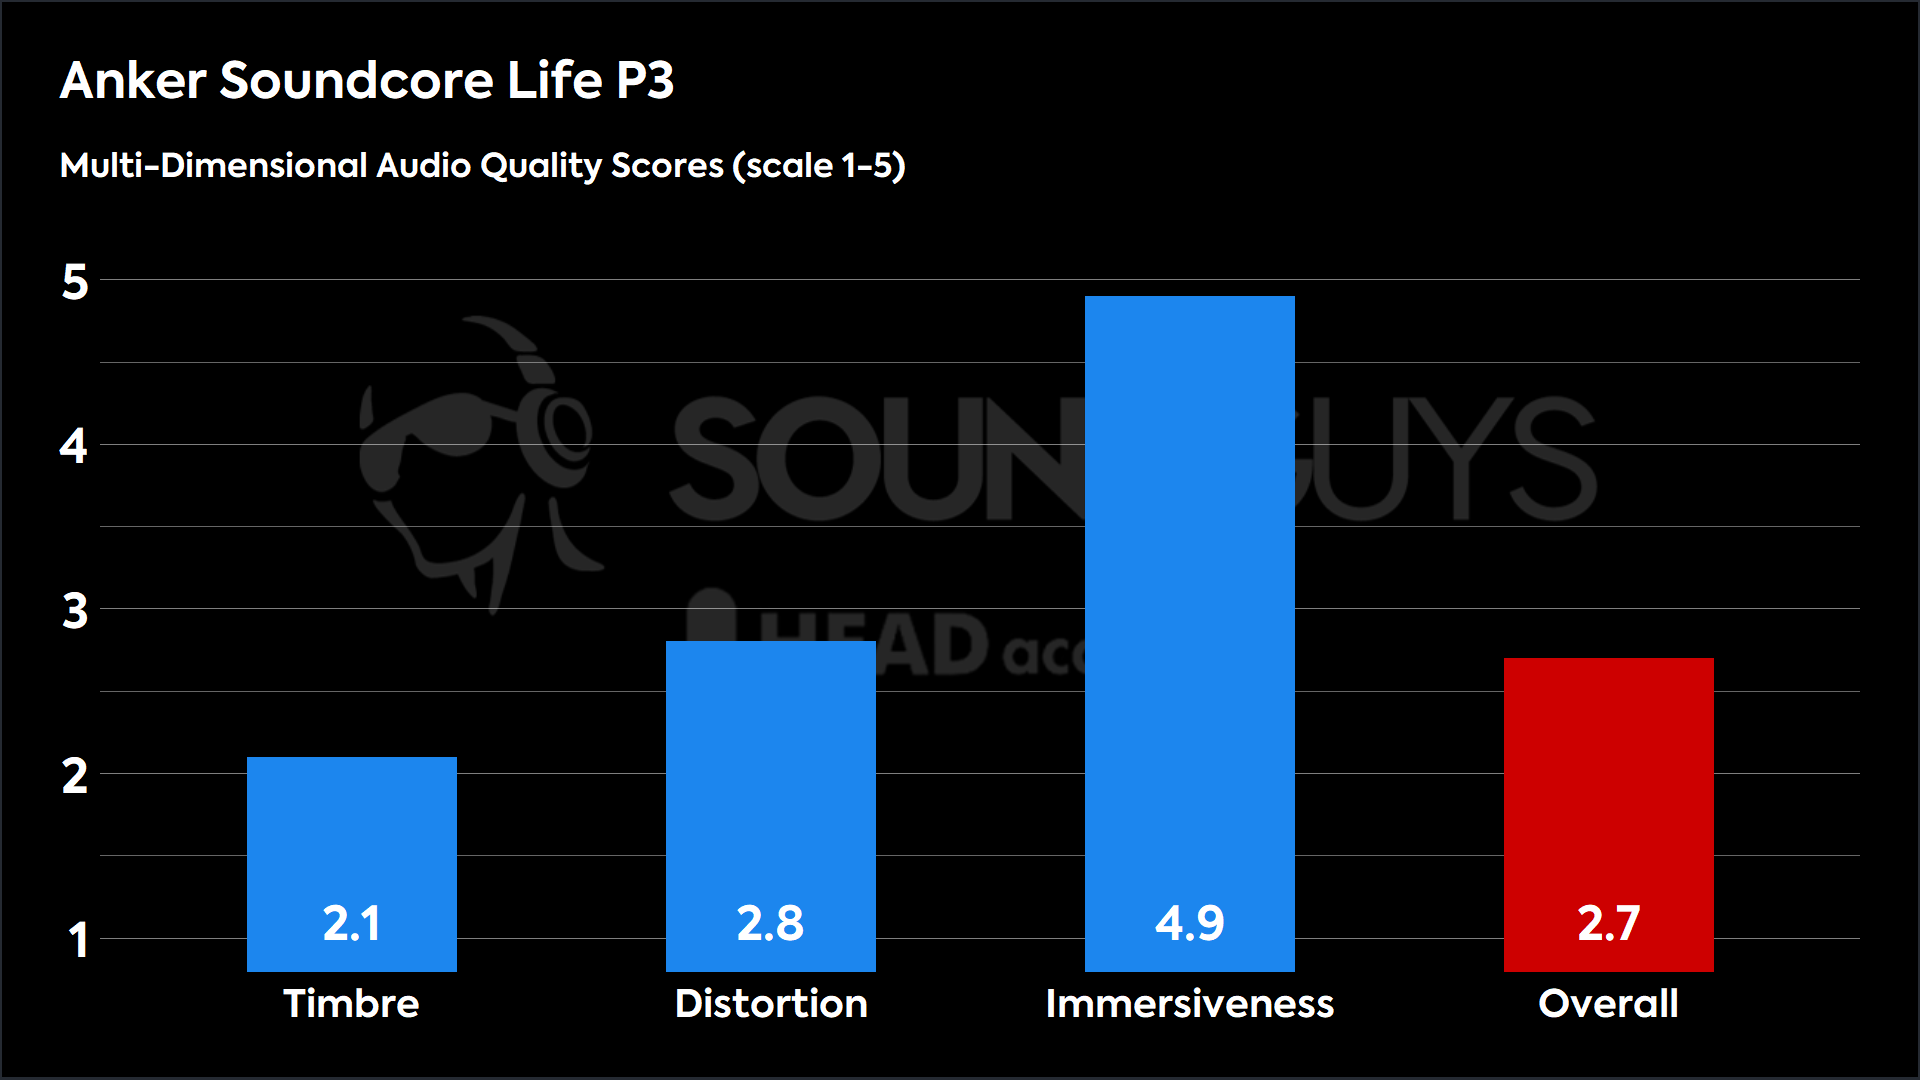 This chart shows the MDAQS results for the Anker Soundcore Life P3 in Default mode. The Timbre score is 2.1, The Distortion score is 2.8, the Immersiveness score is 4.9, and the Overall Score is 2.7.